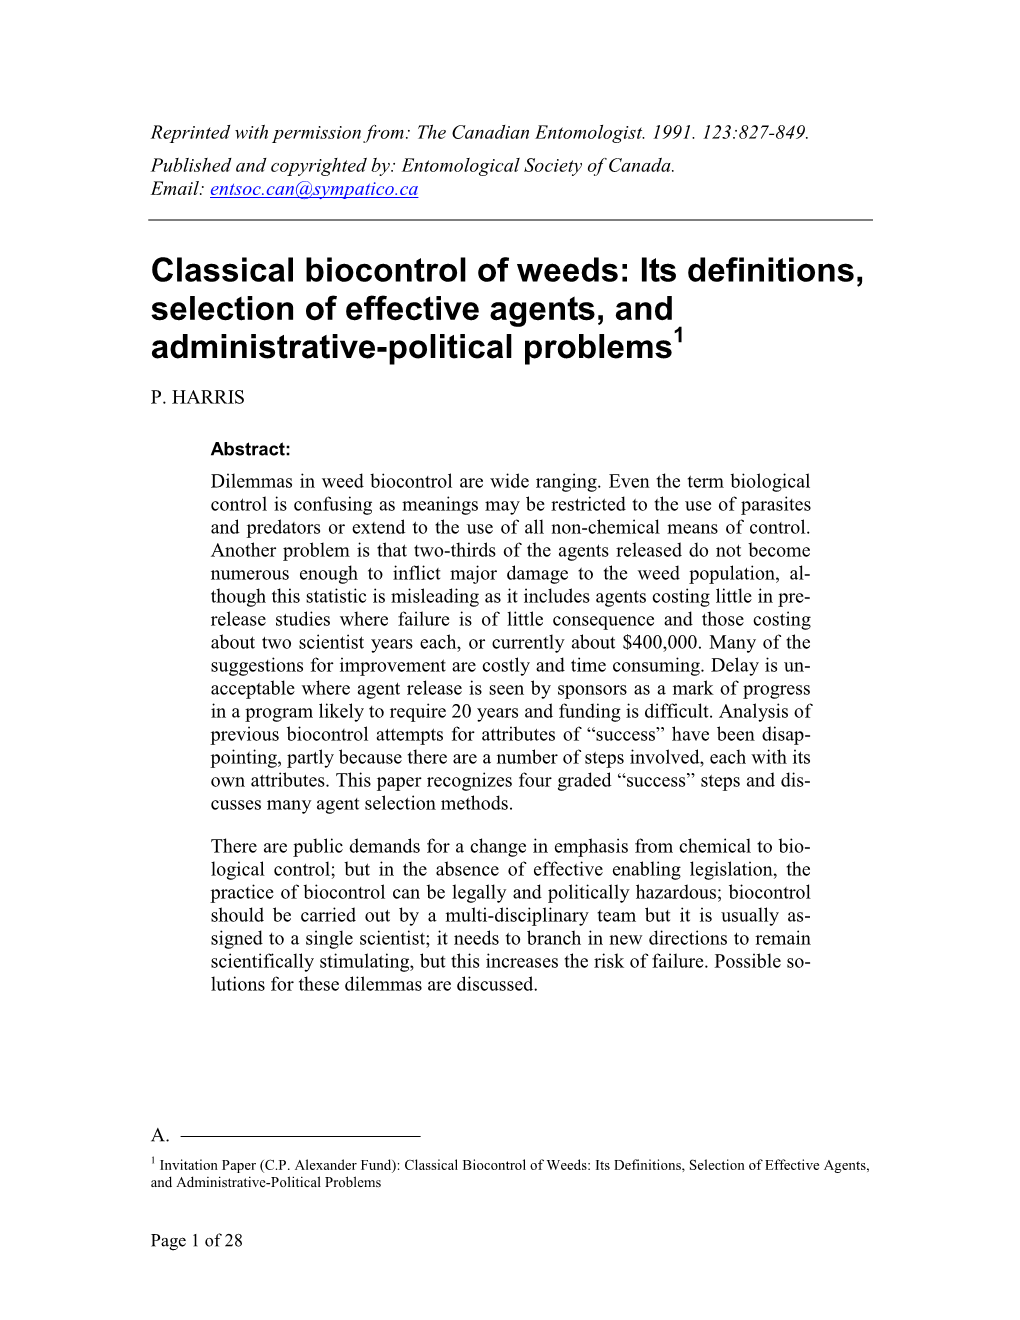 Classical Biocontrol of Weeds: Its Definitions, Selection of Effective Agents, and Administrative-Political Problems1